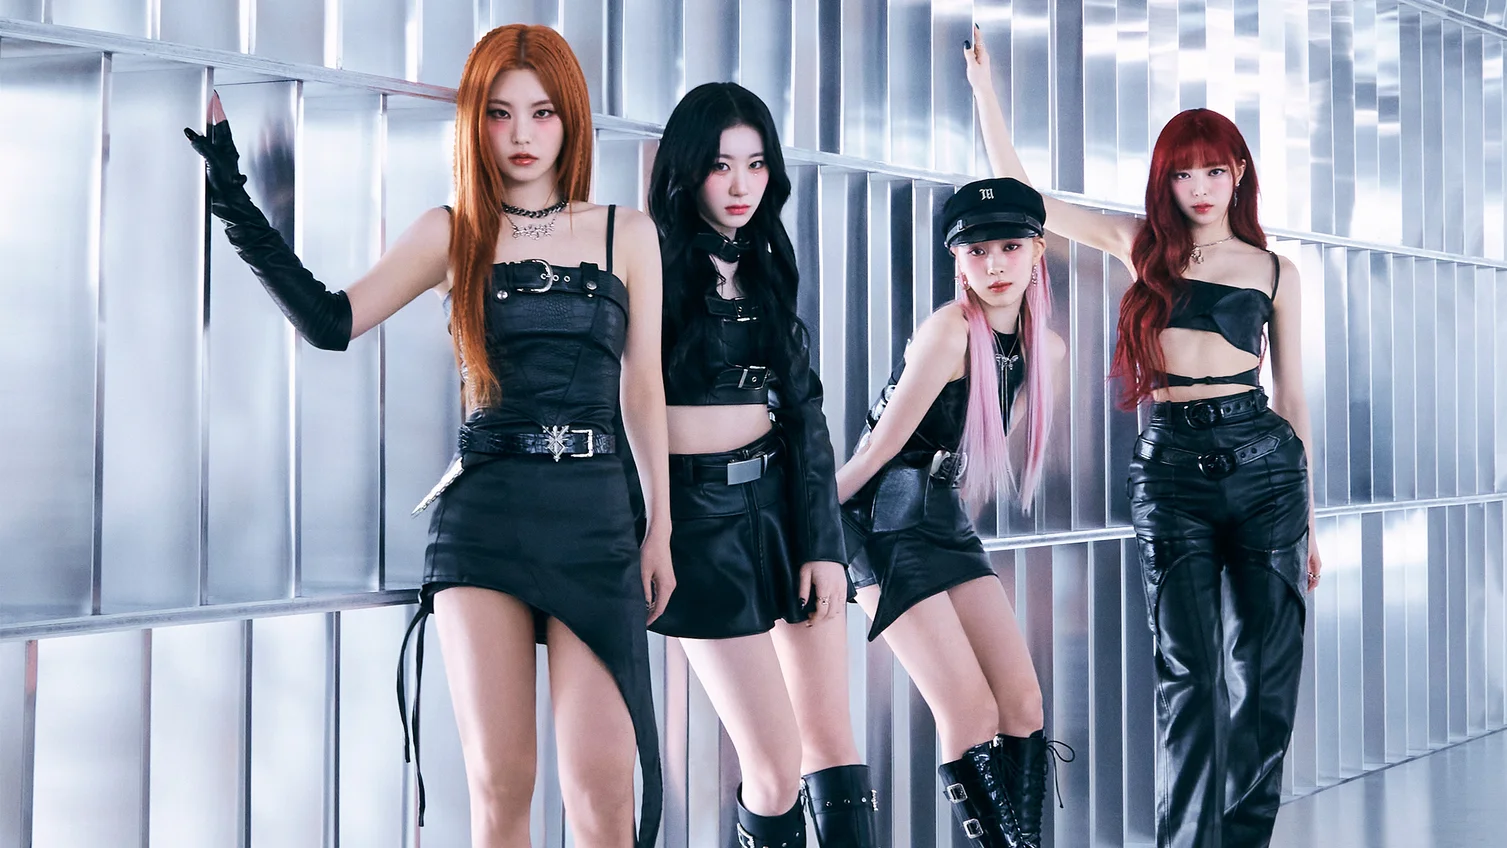 Name the Itzy Song Based on the English Lyrics